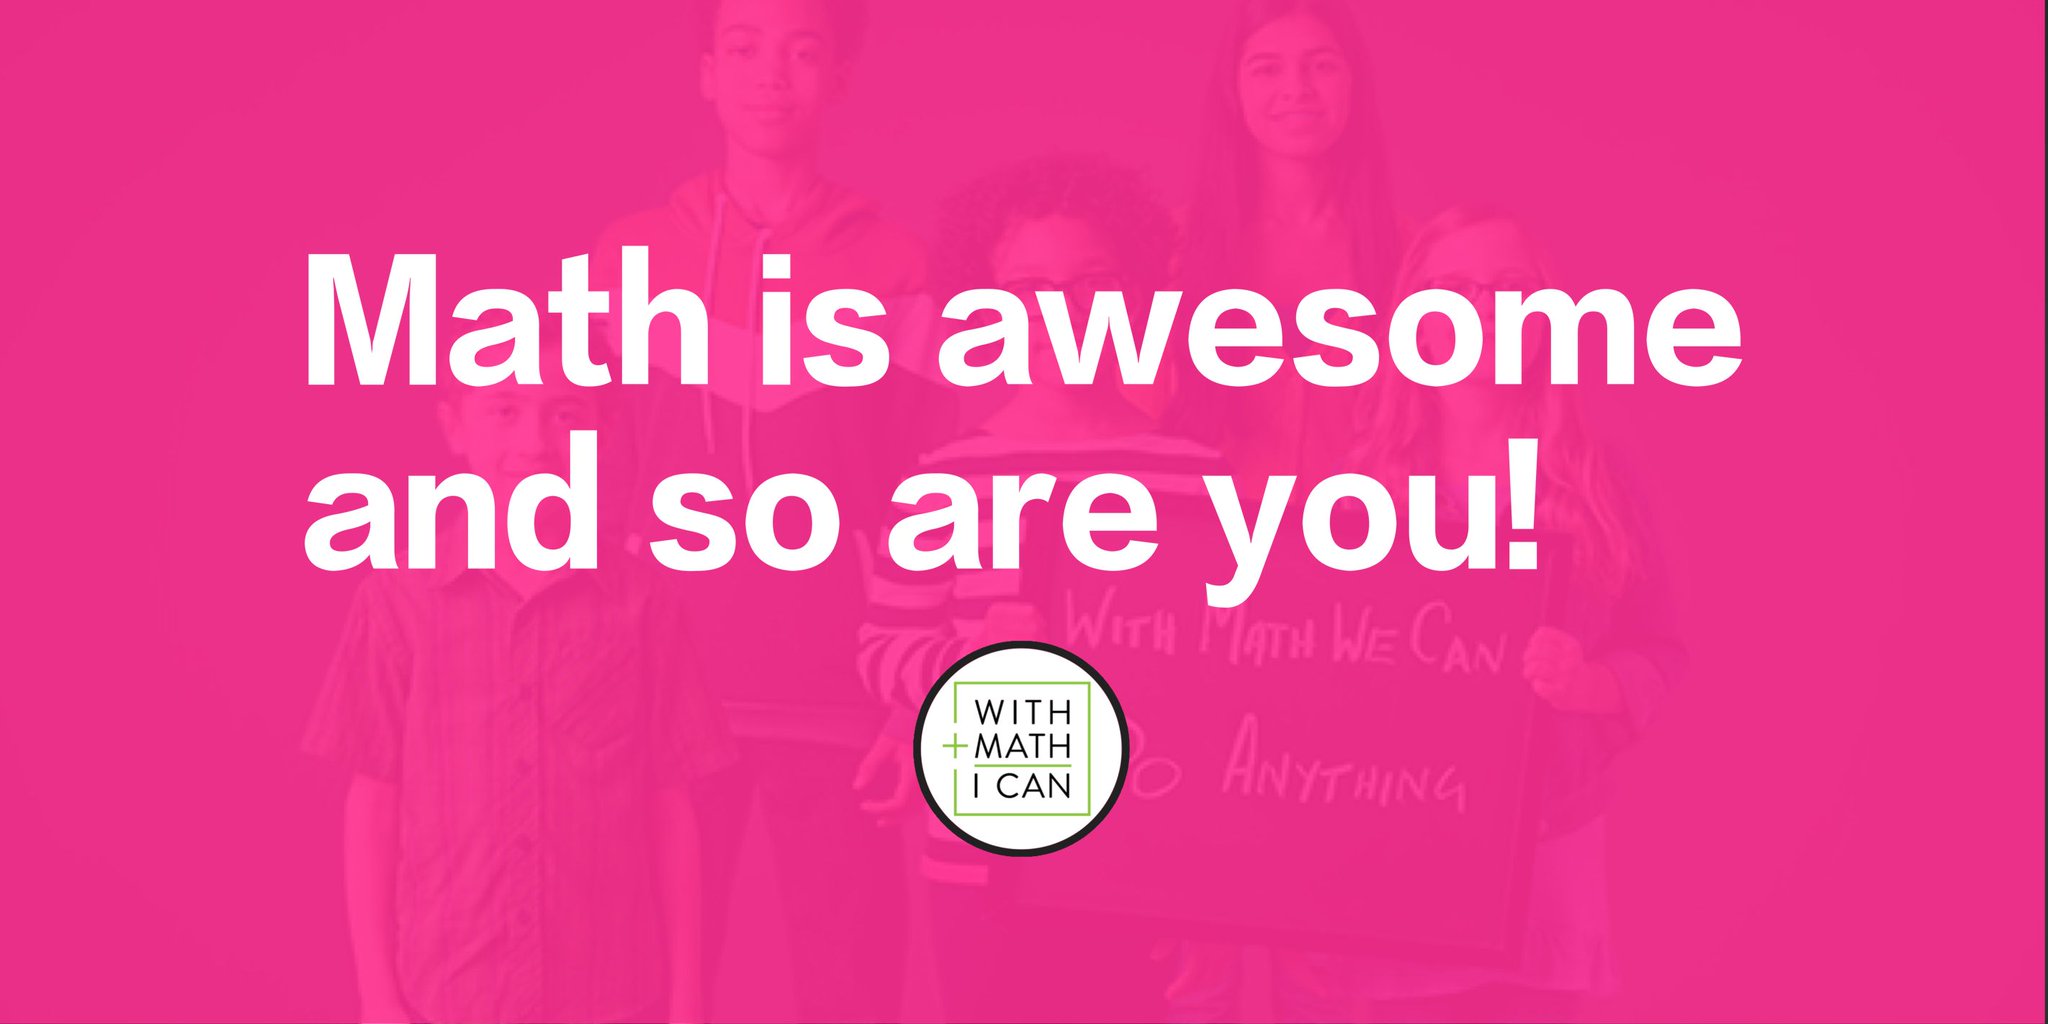 WithMathICan on Twitter: "Please retweet to help spread the word that math  is awesome! https://t.co/hJuIZvchgd #WithMathICan https://t.co/uMrBiMgYFG"  / Twitter